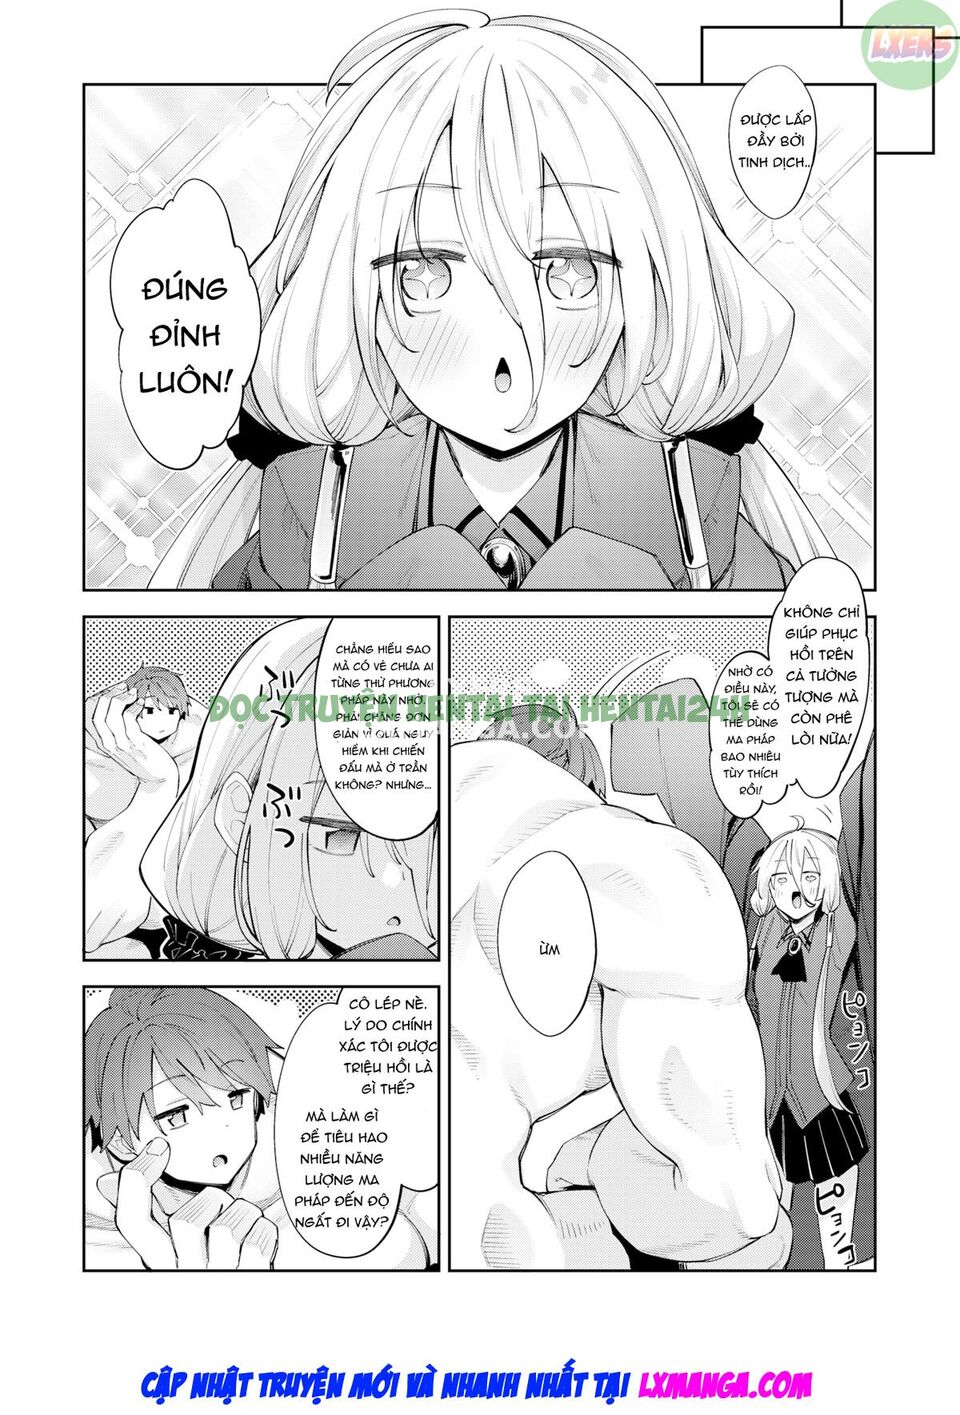 Xem ảnh I Was Summoned To Another World, So I'm Going To Take Advantage Of My Honed Body To Get Lucky - Chapter 2 END - 30 - Hentai24h.Tv